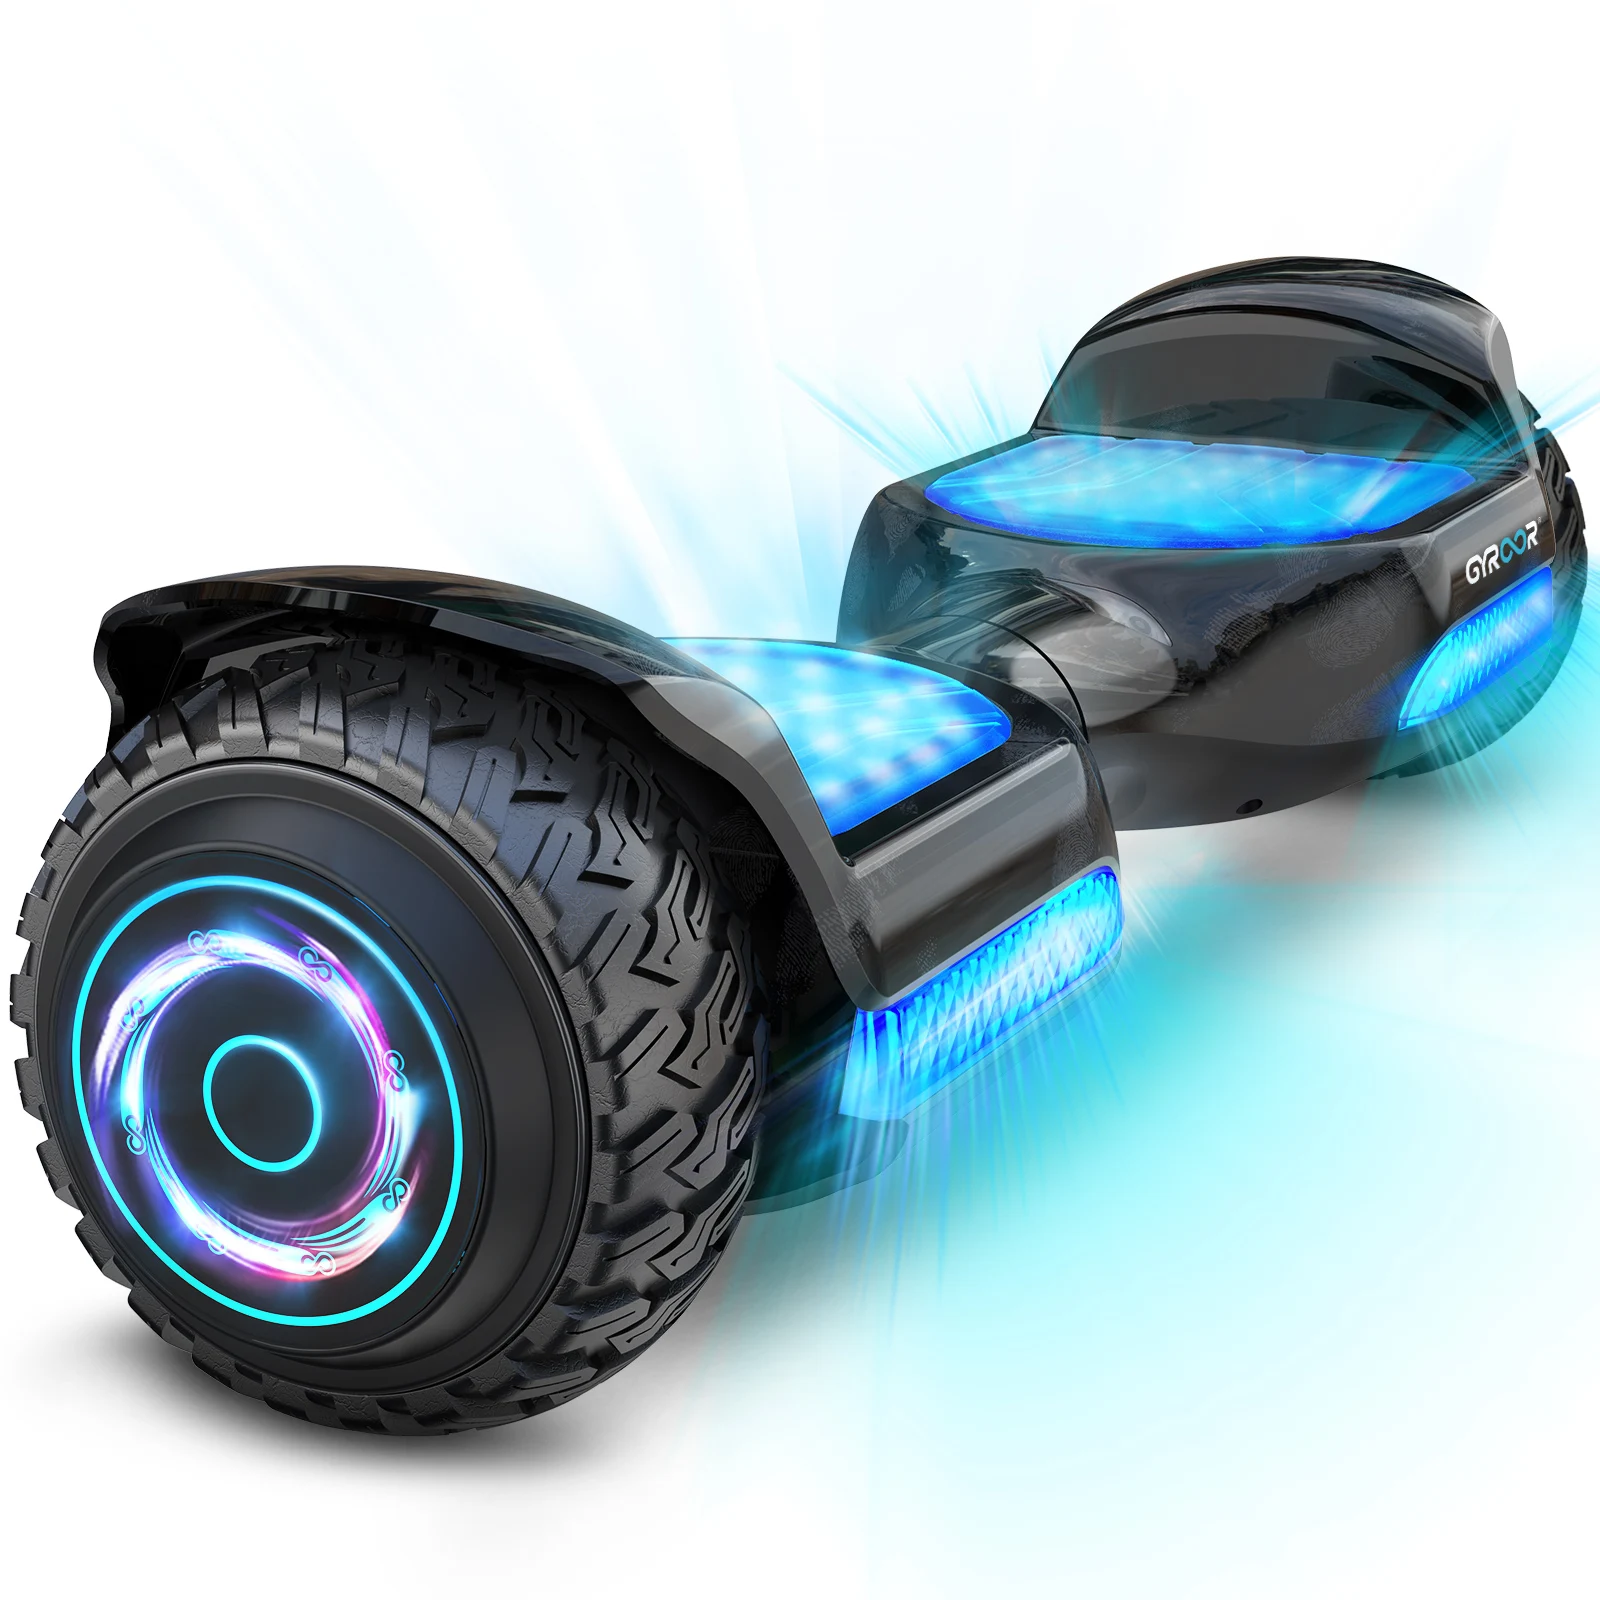 

GYROOR Blue tooth & App Self balance Electric Scooter Hover board self balancing hoverboard